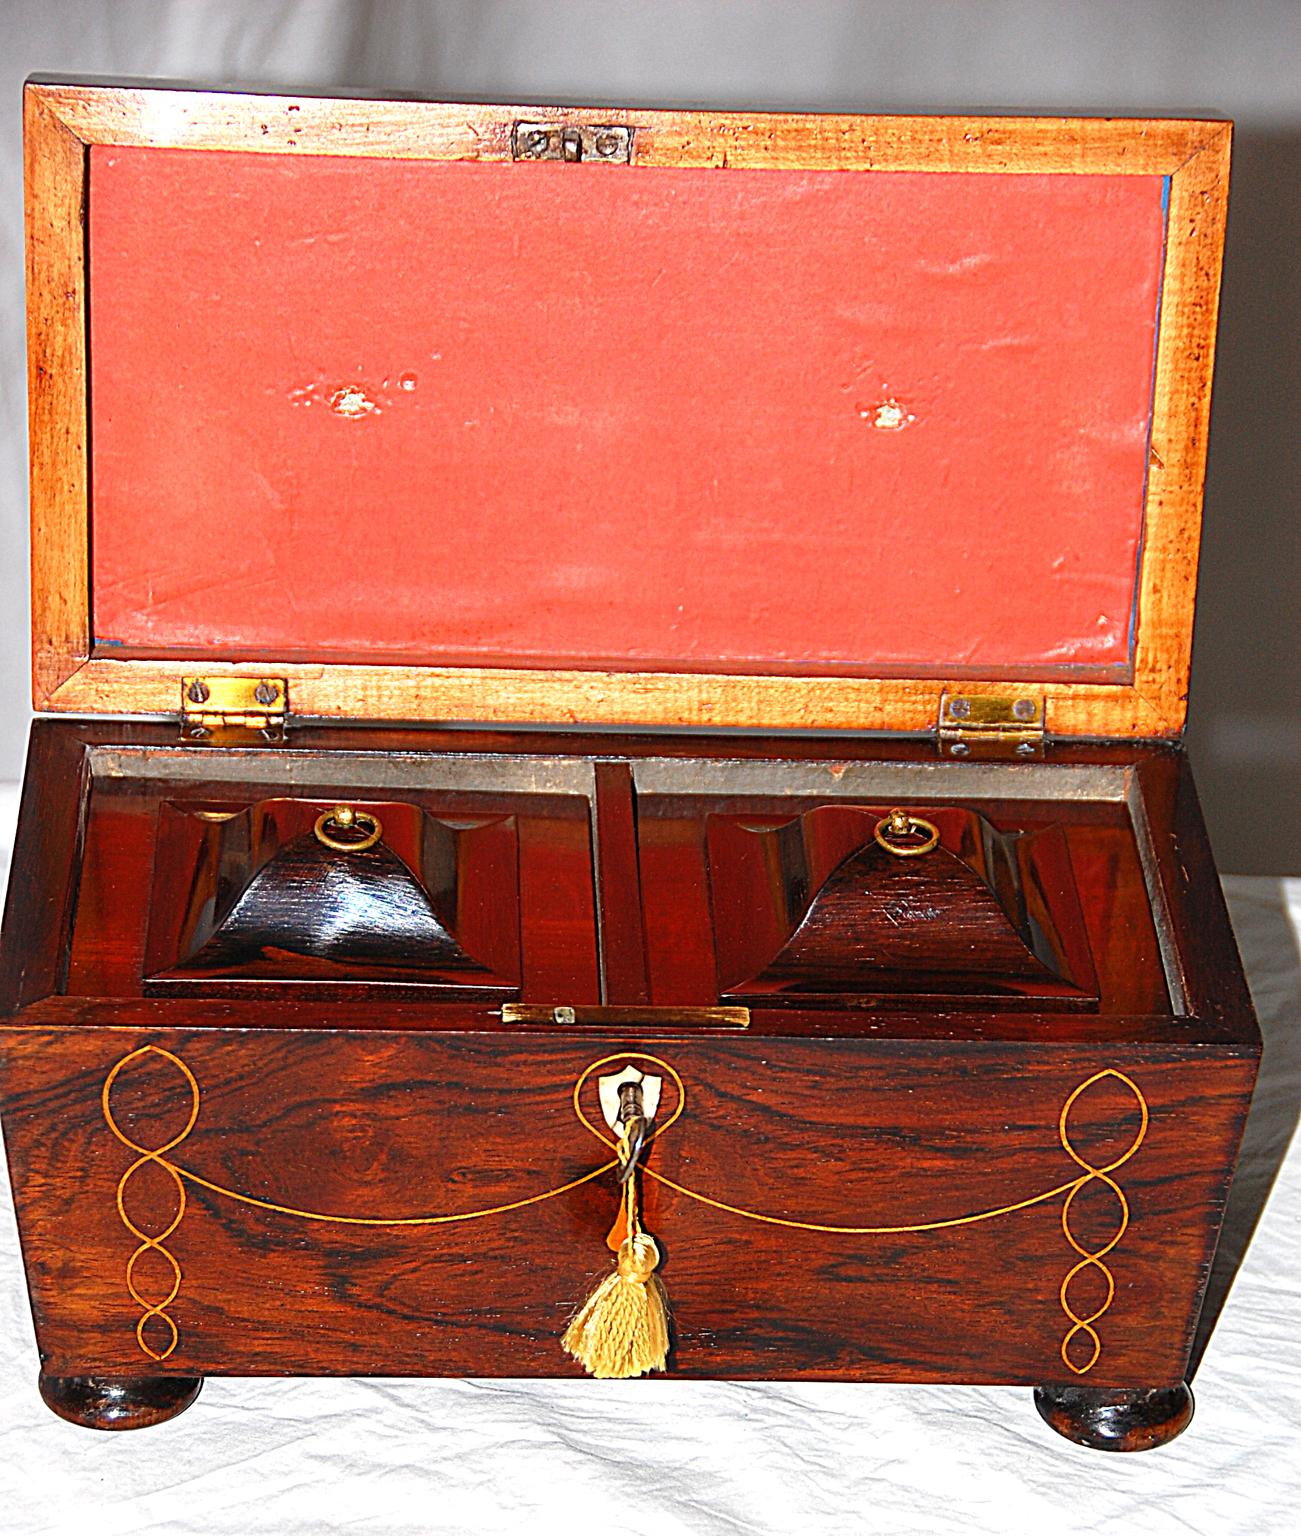 Early 19th Century English Regency Period Rosewood Tea Caddy with Boxwood Shell and Line Inlay